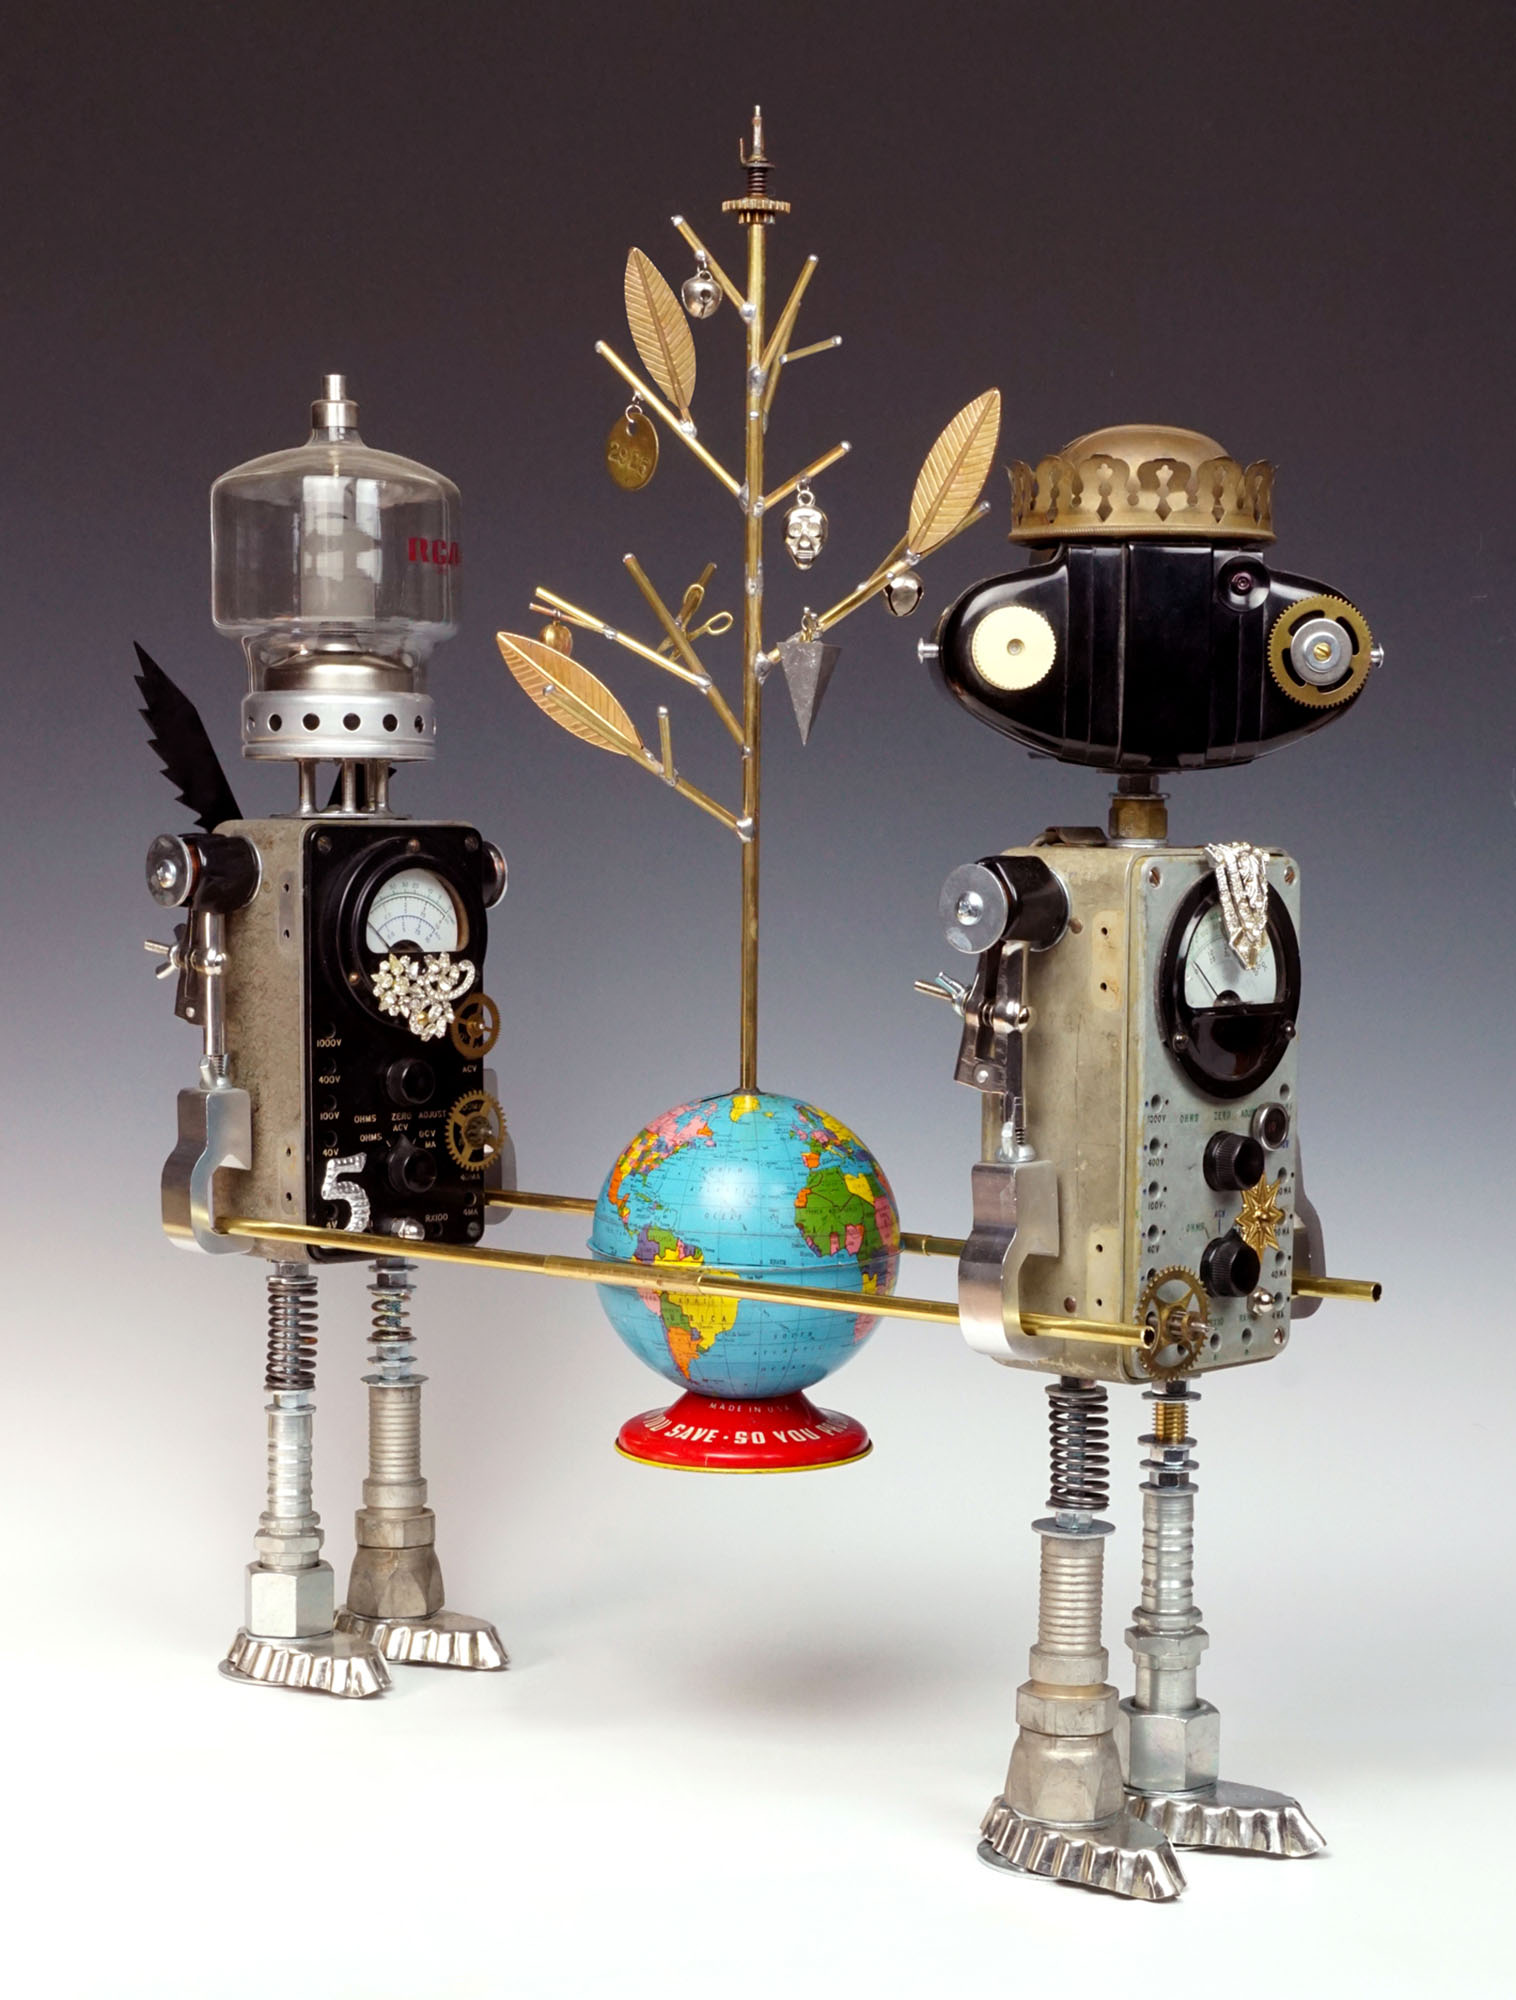 Amy Flynn, After Us: The Conservators (2021). Soldered and bolted recycled found vintage objects. Dimensions: 22” h x 18” w x 6” d. ©Amy Flynn 2021. Courtesy of the artist.